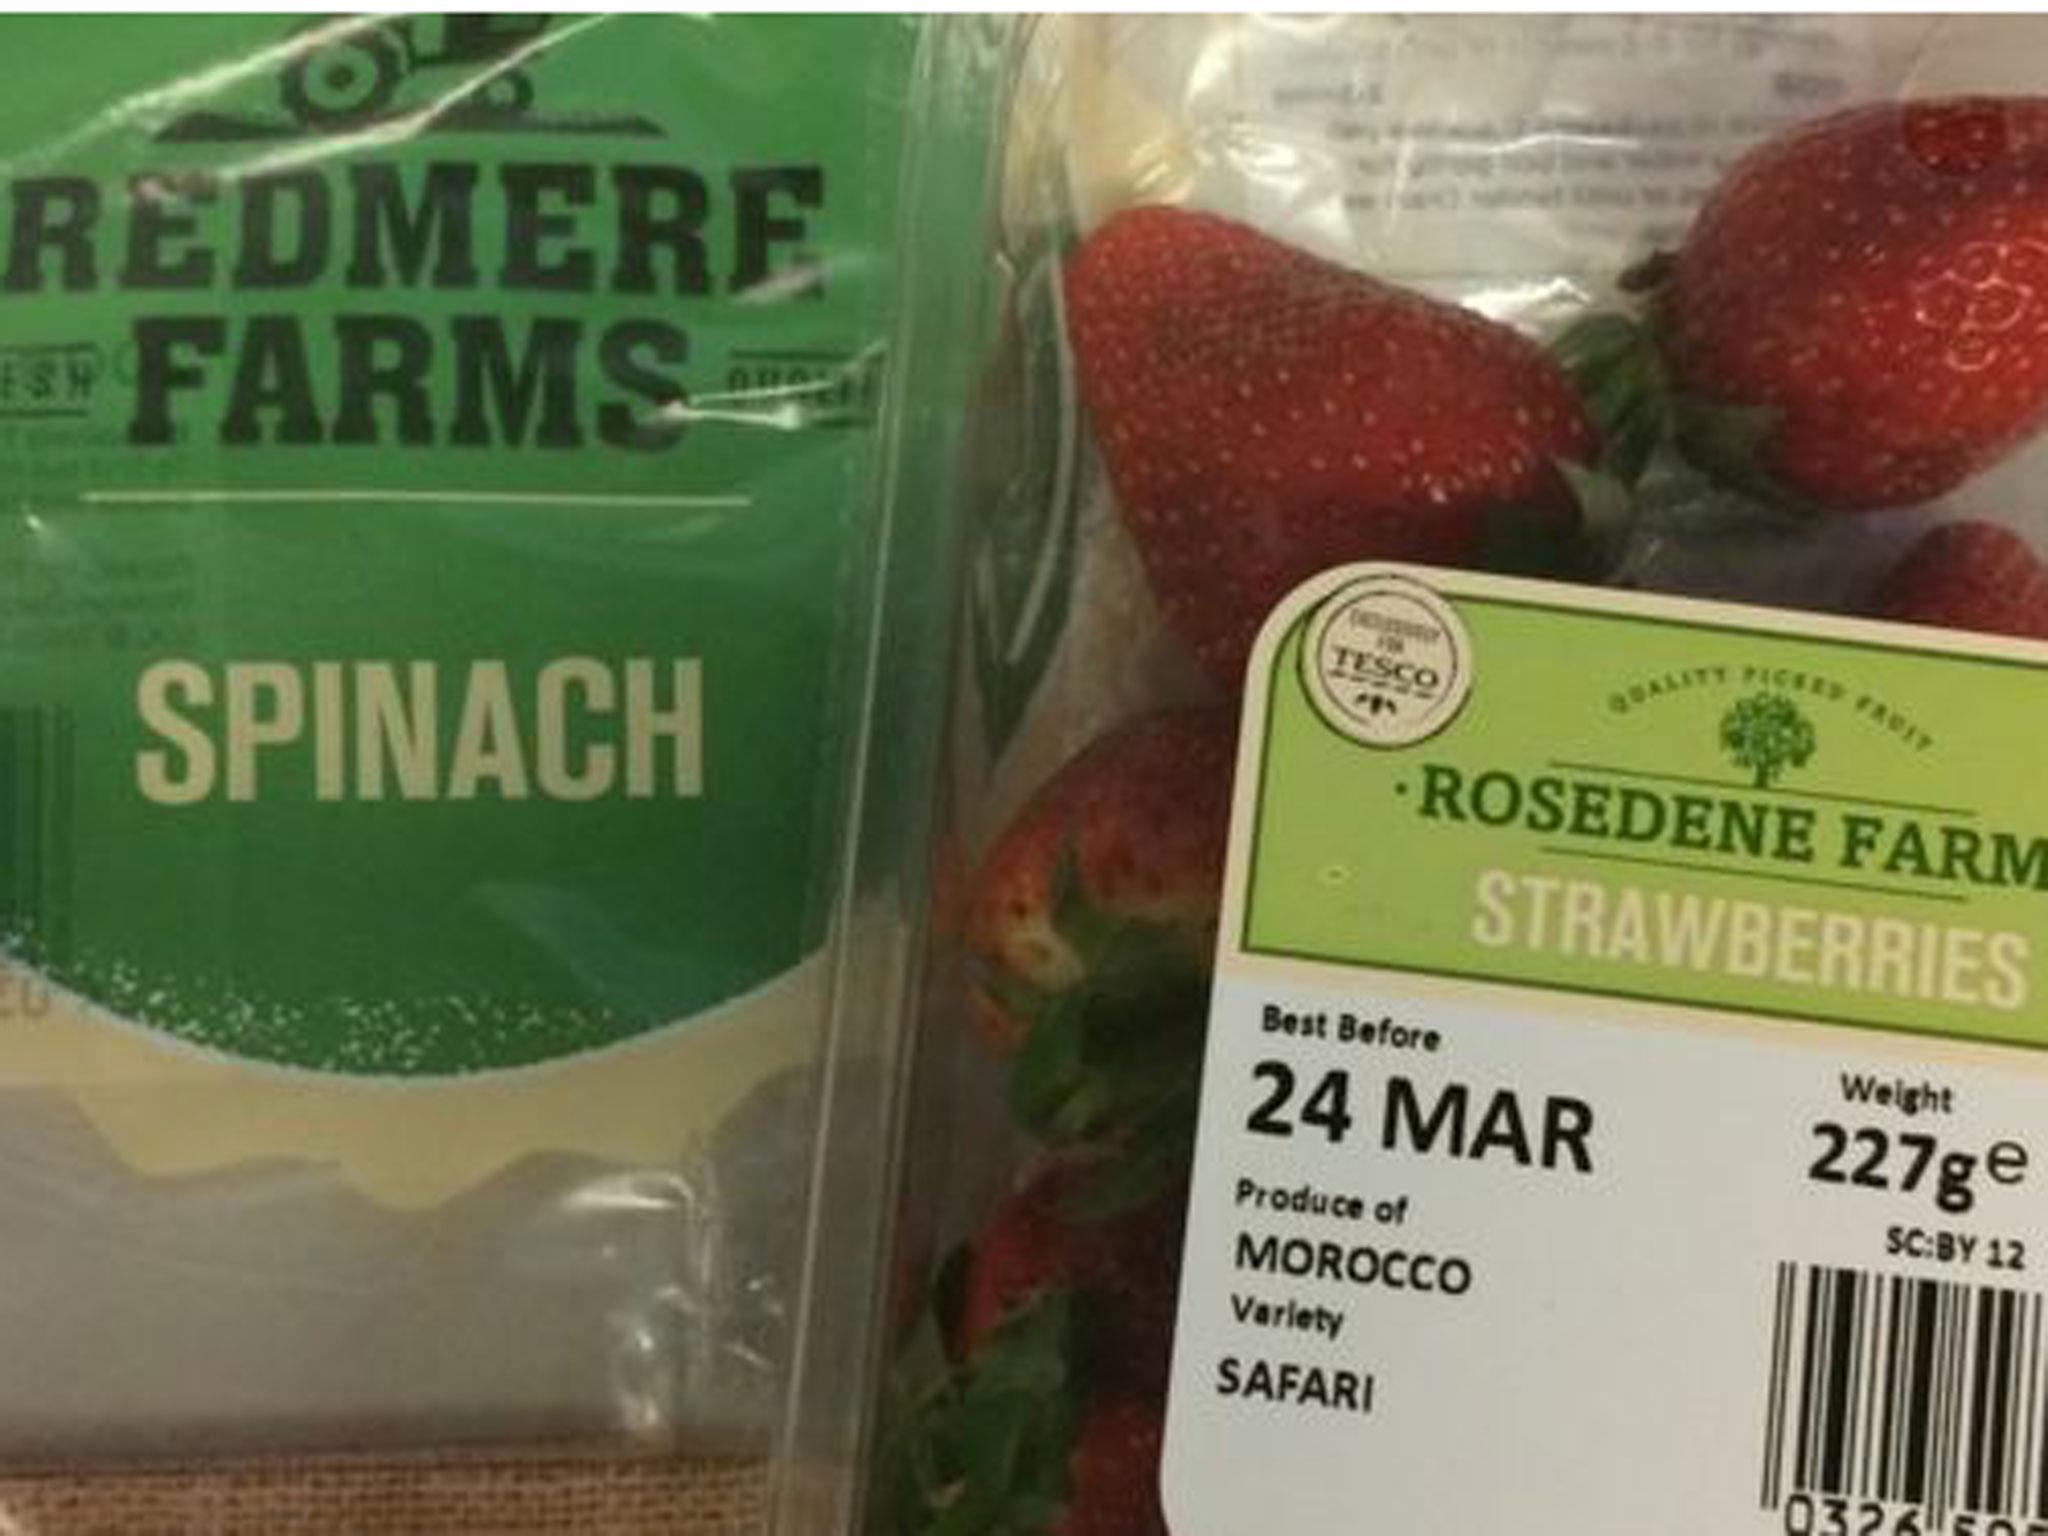 Names like ‘Redmere’ and ‘Rosedene’ are nothing more than creations of a marketing team’s imaginations